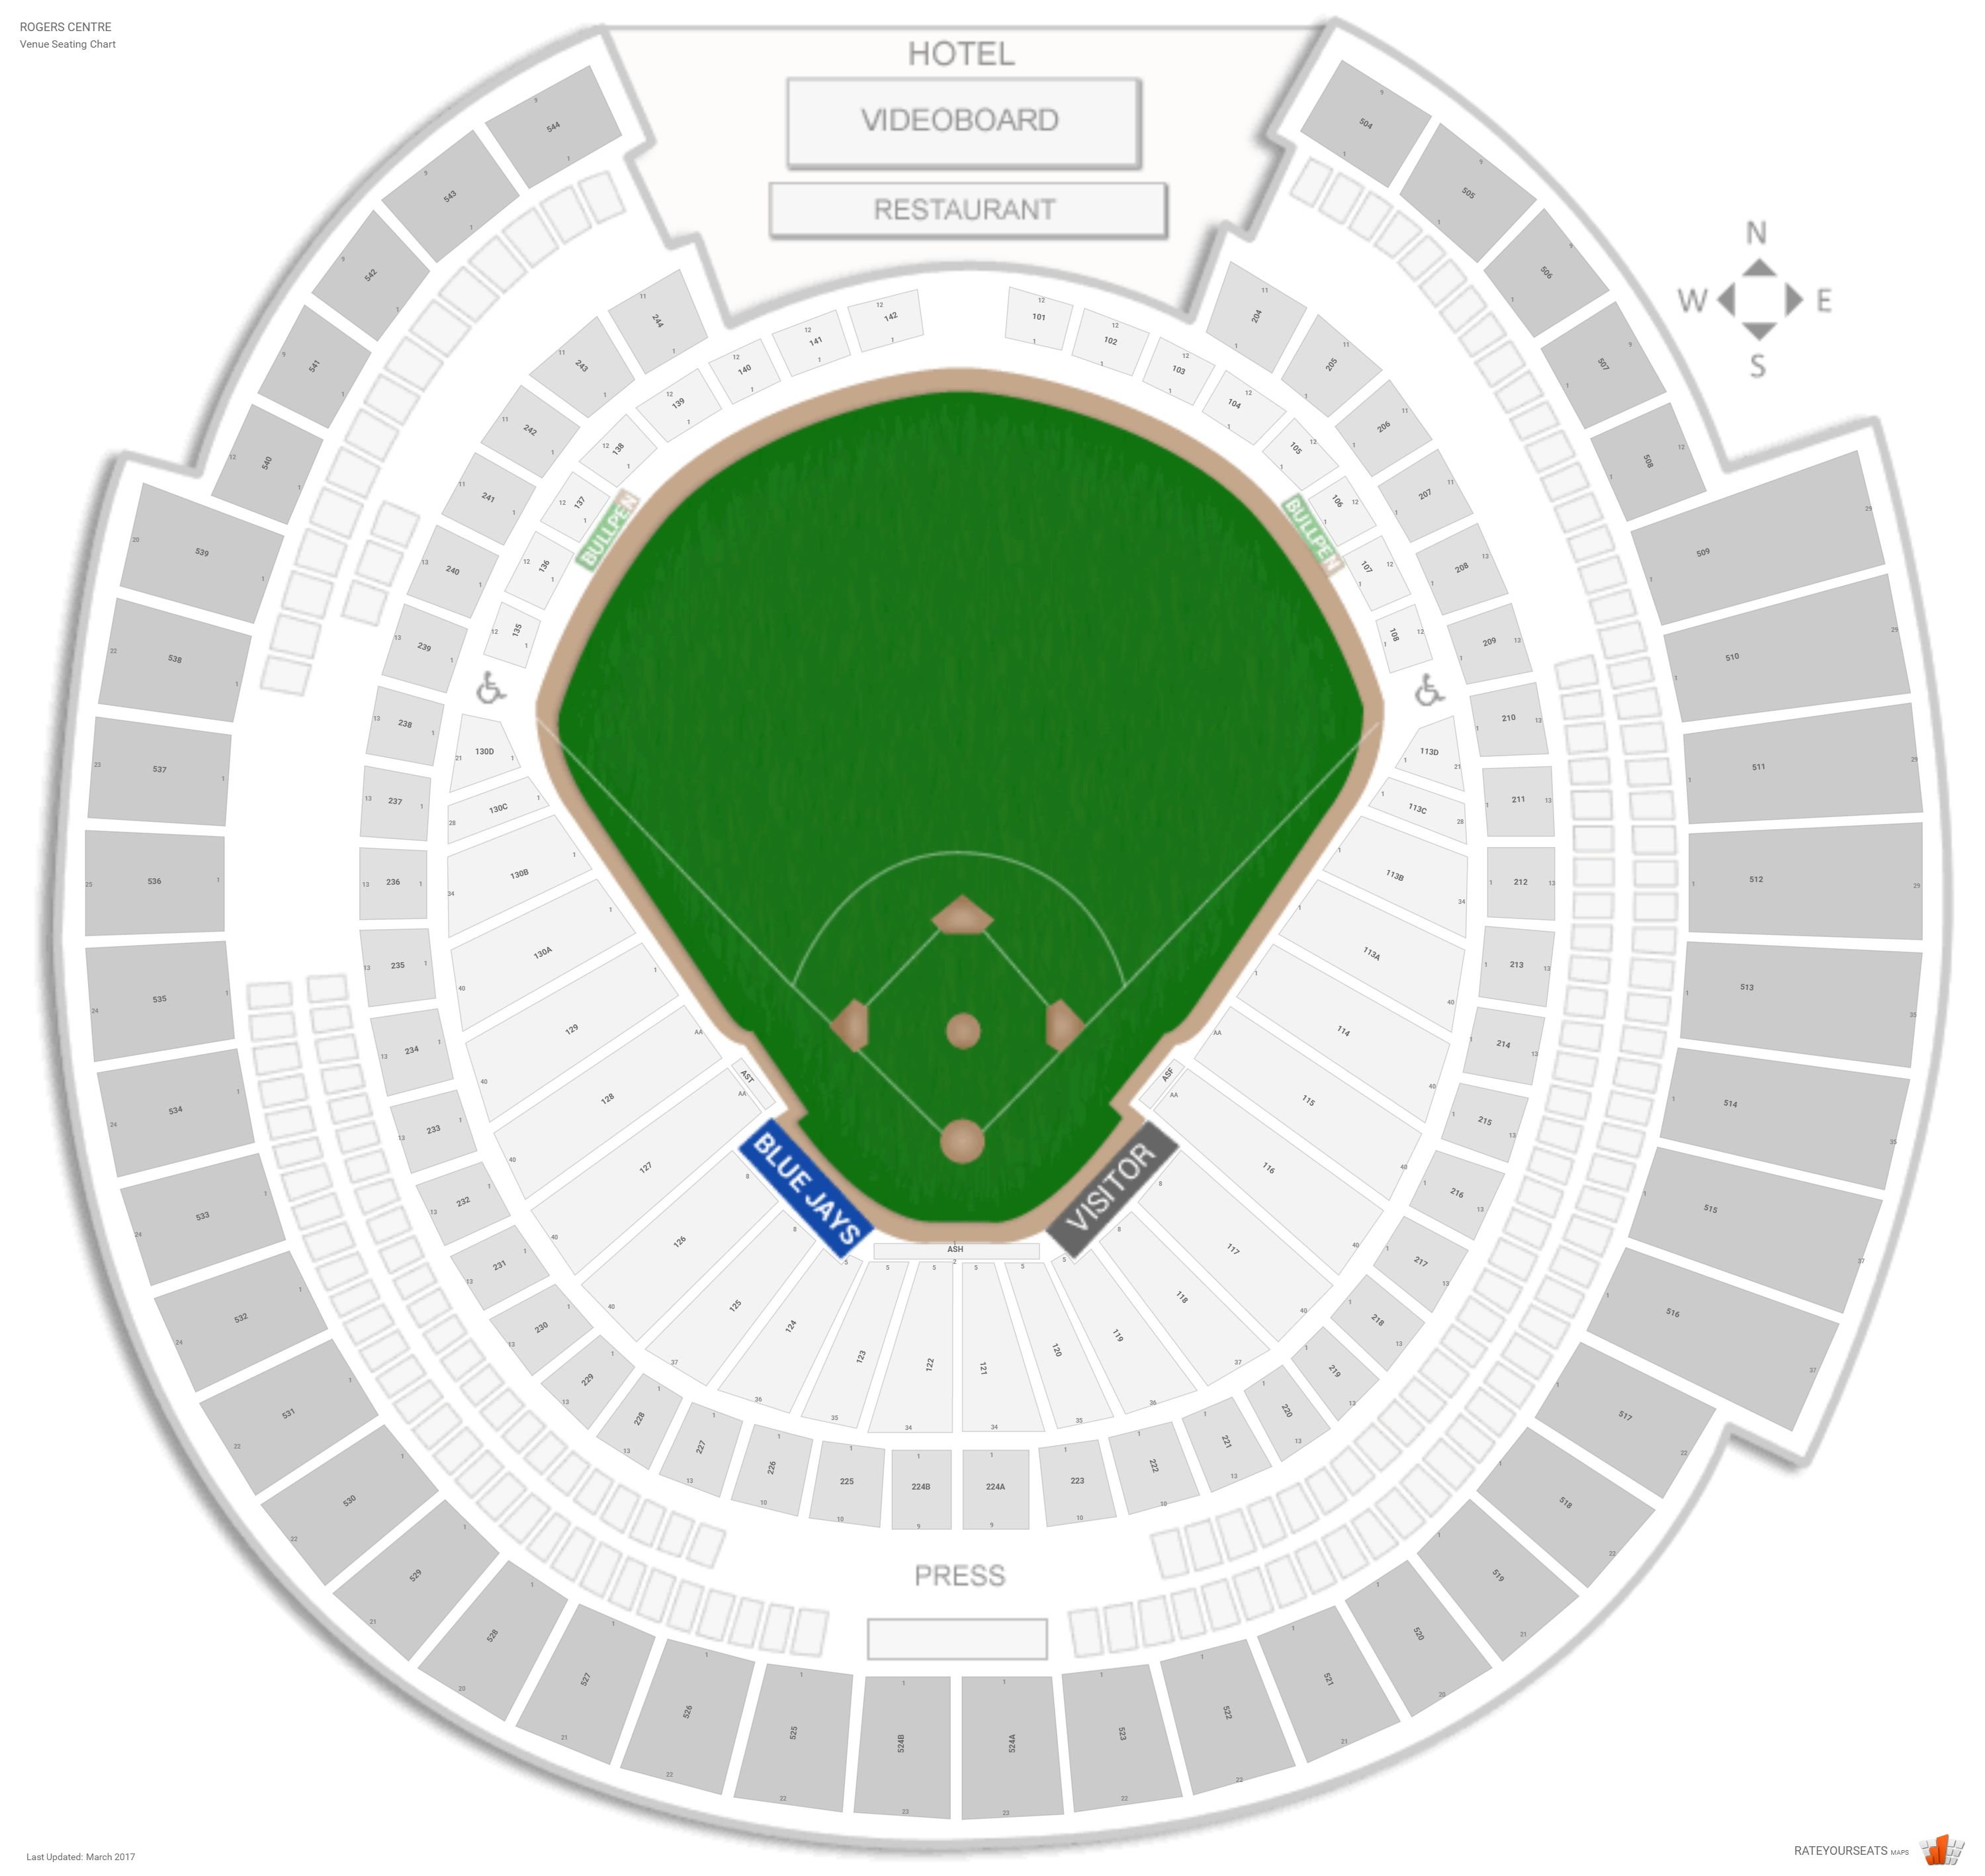 Rogers Centre Seating Chart Blue Jays Game